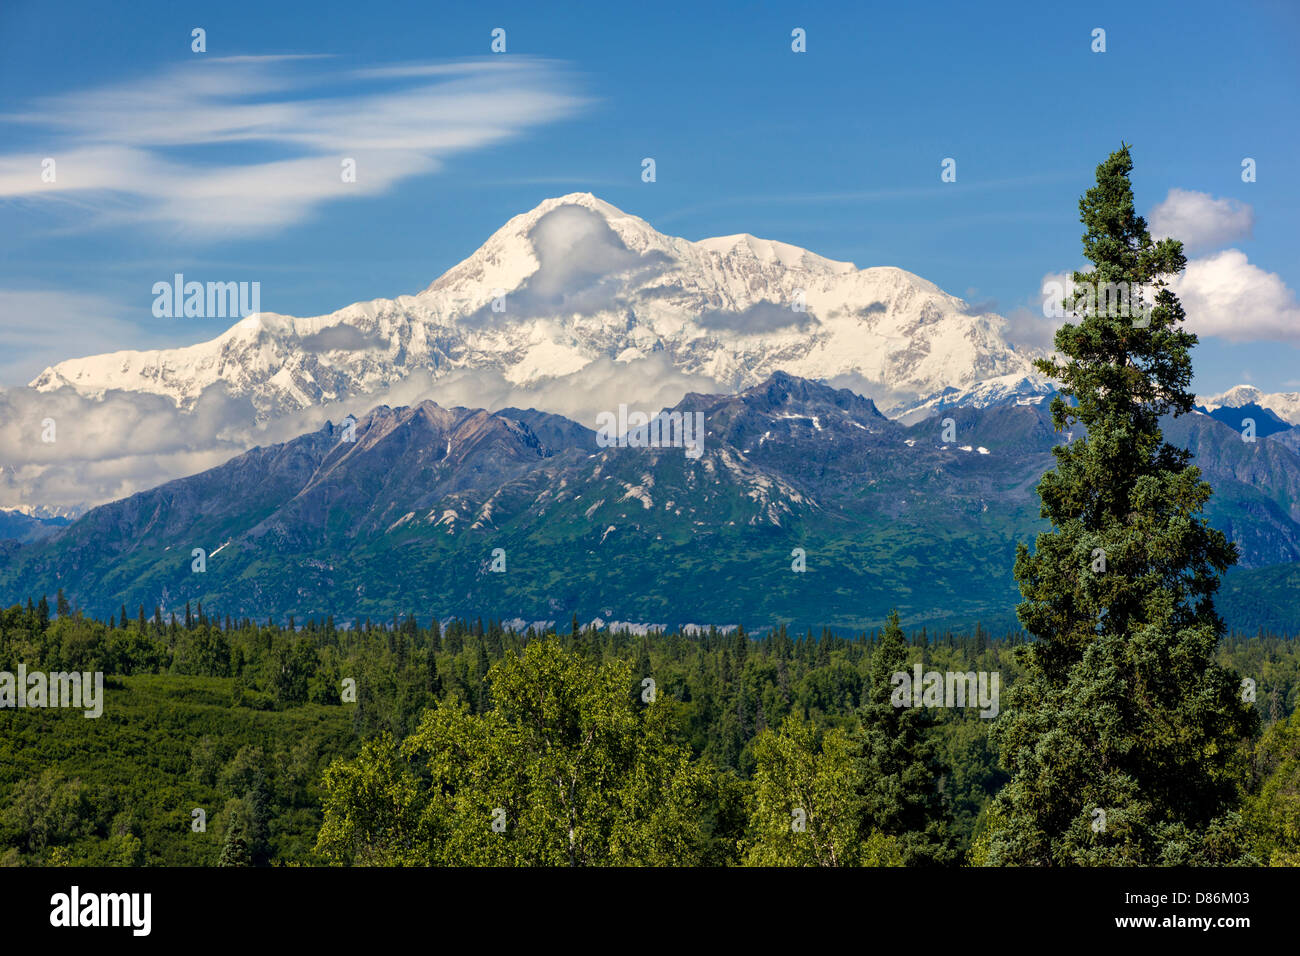 View north of Alaska Range and Denali Mountain (Mt. McKinley) from 'Denali Viewpoint South” George Parks Highway 3, Alaska, USA Stock Photo